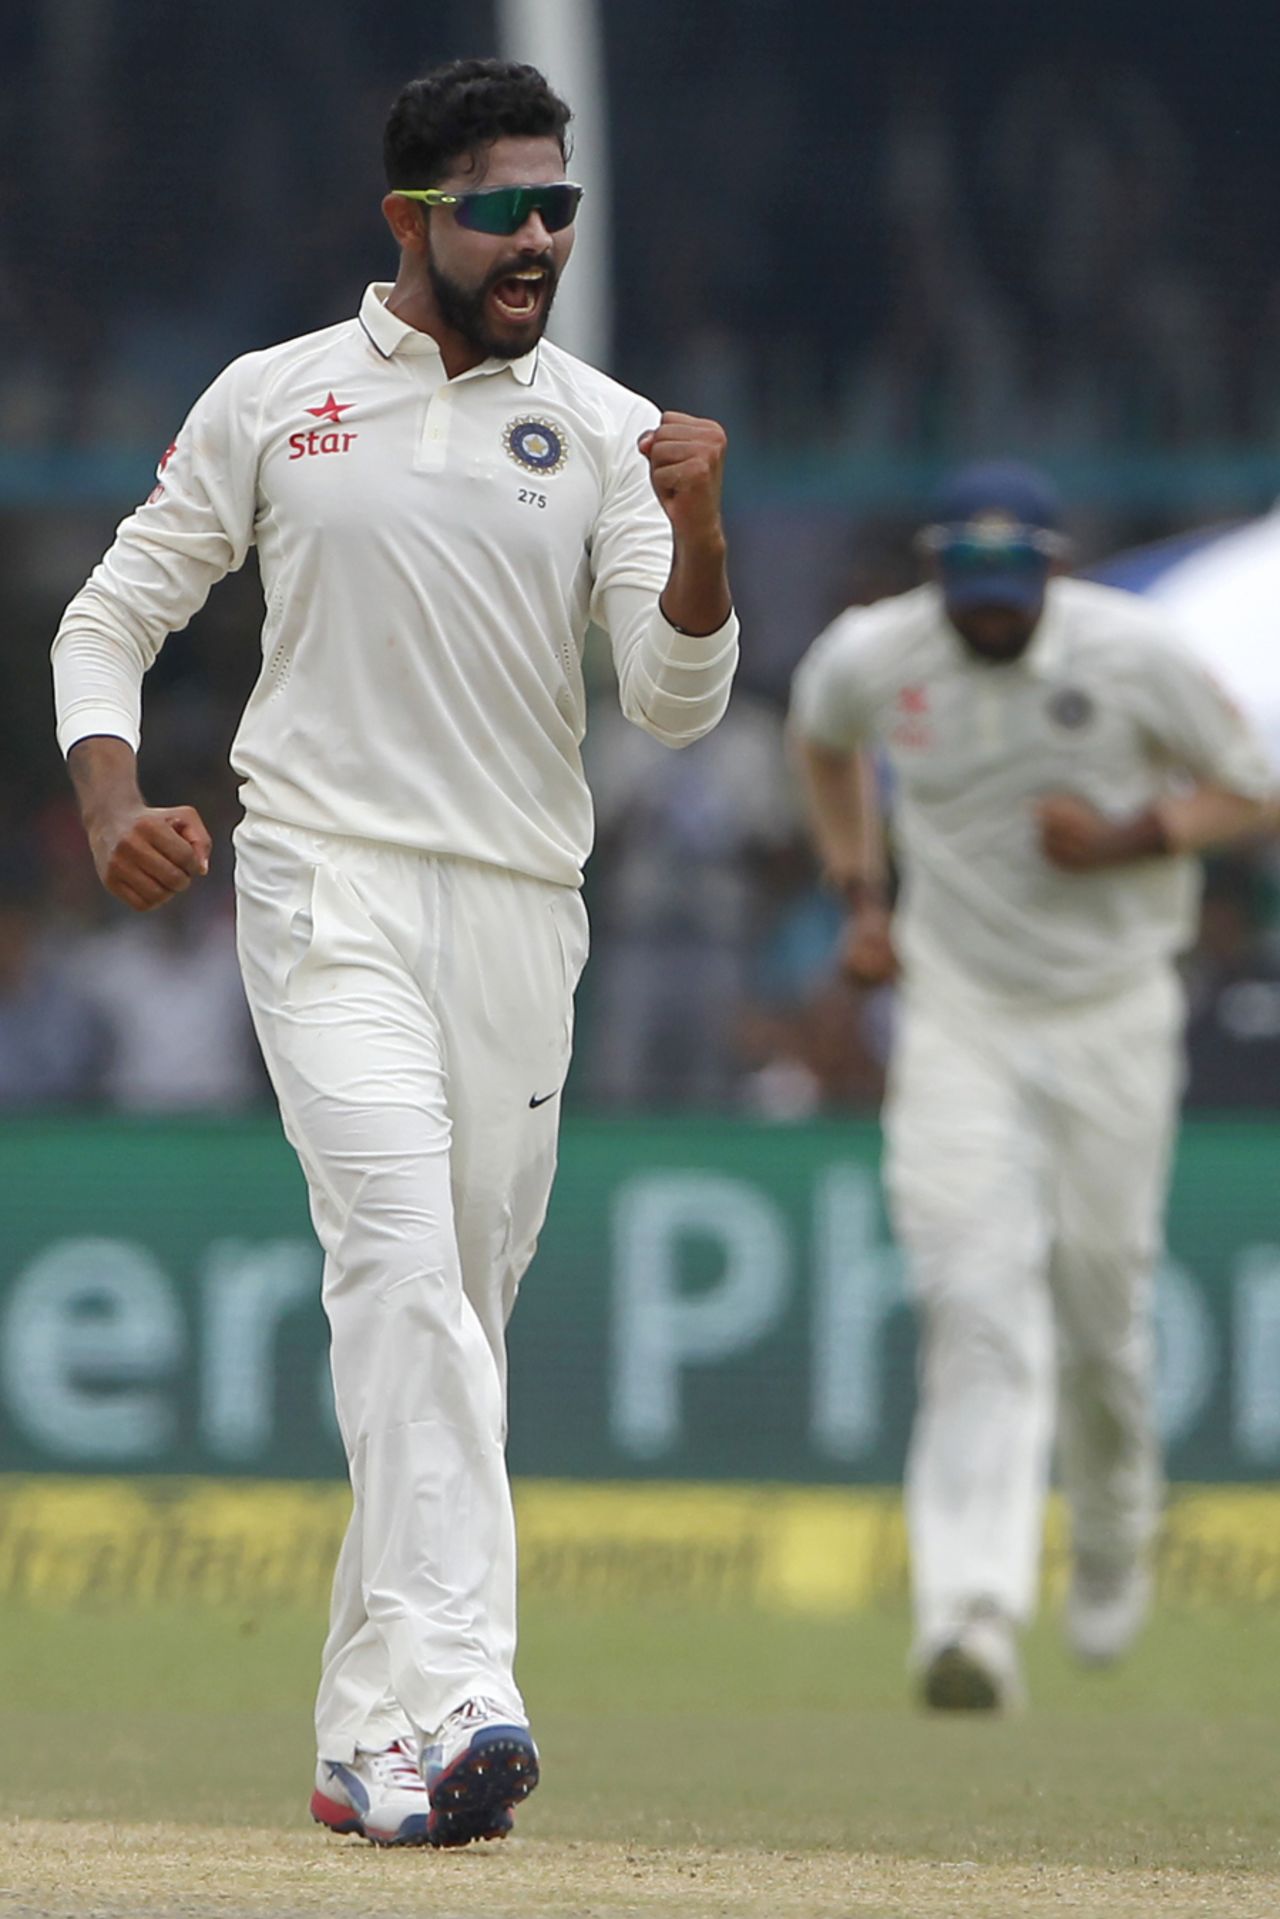 Ravindra Jadeja pumps his fist after a wicket, India v New Zealand, 1st Test, Kanpur, 3rd day, September 24, 2016